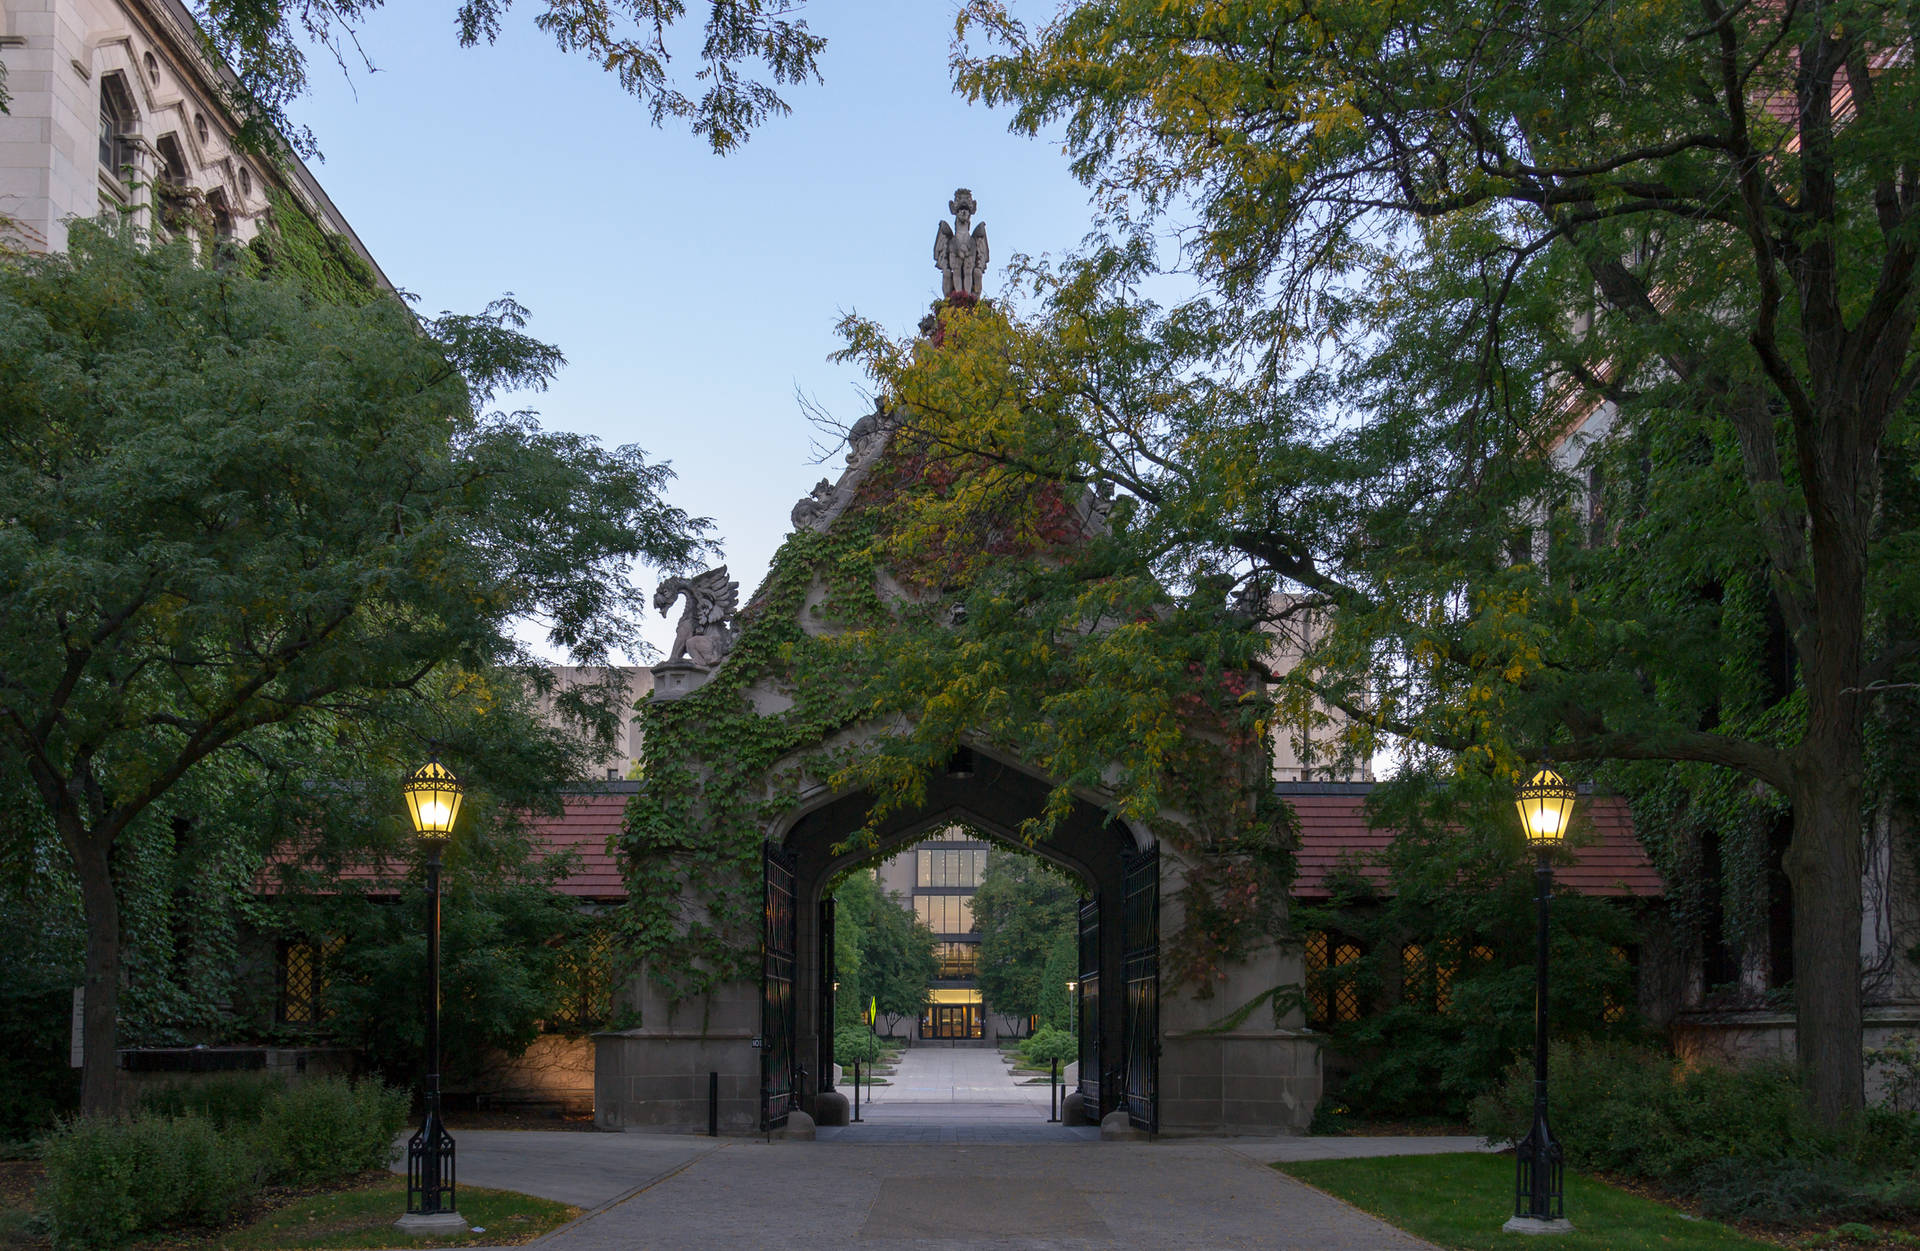 Stunning Archway View of the University of Chicago Wallpaper